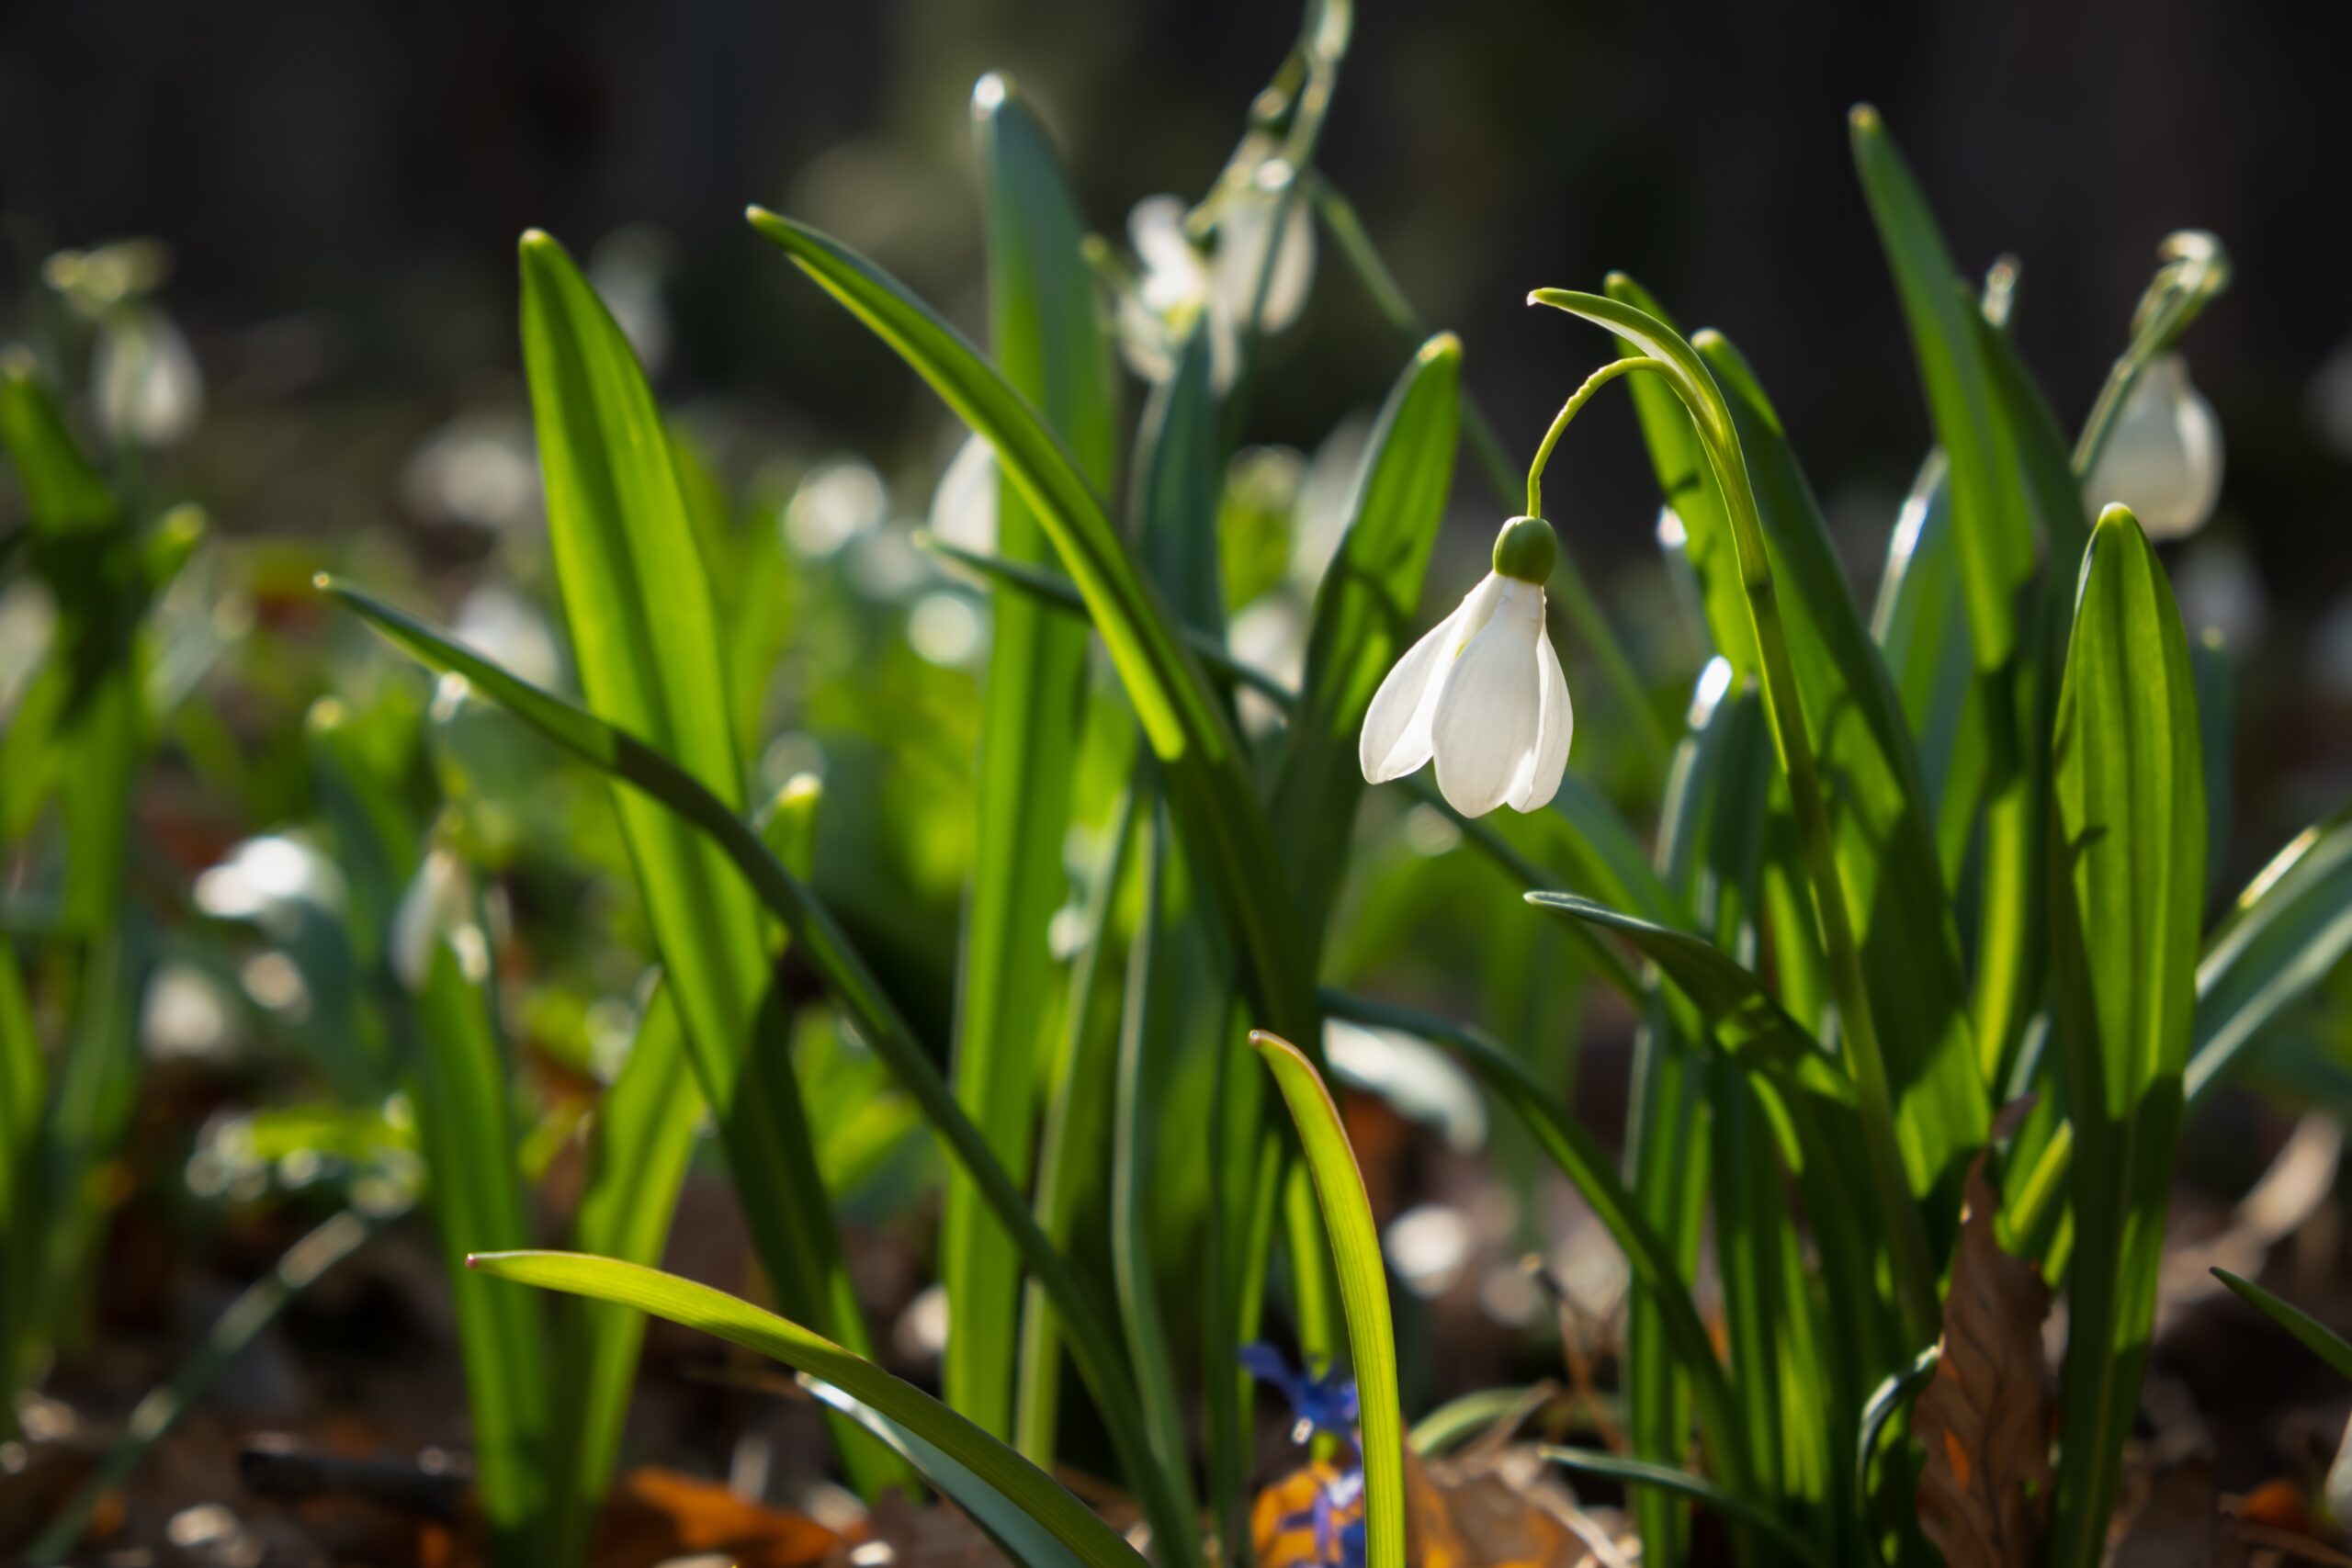 cluster of snow drop flowers